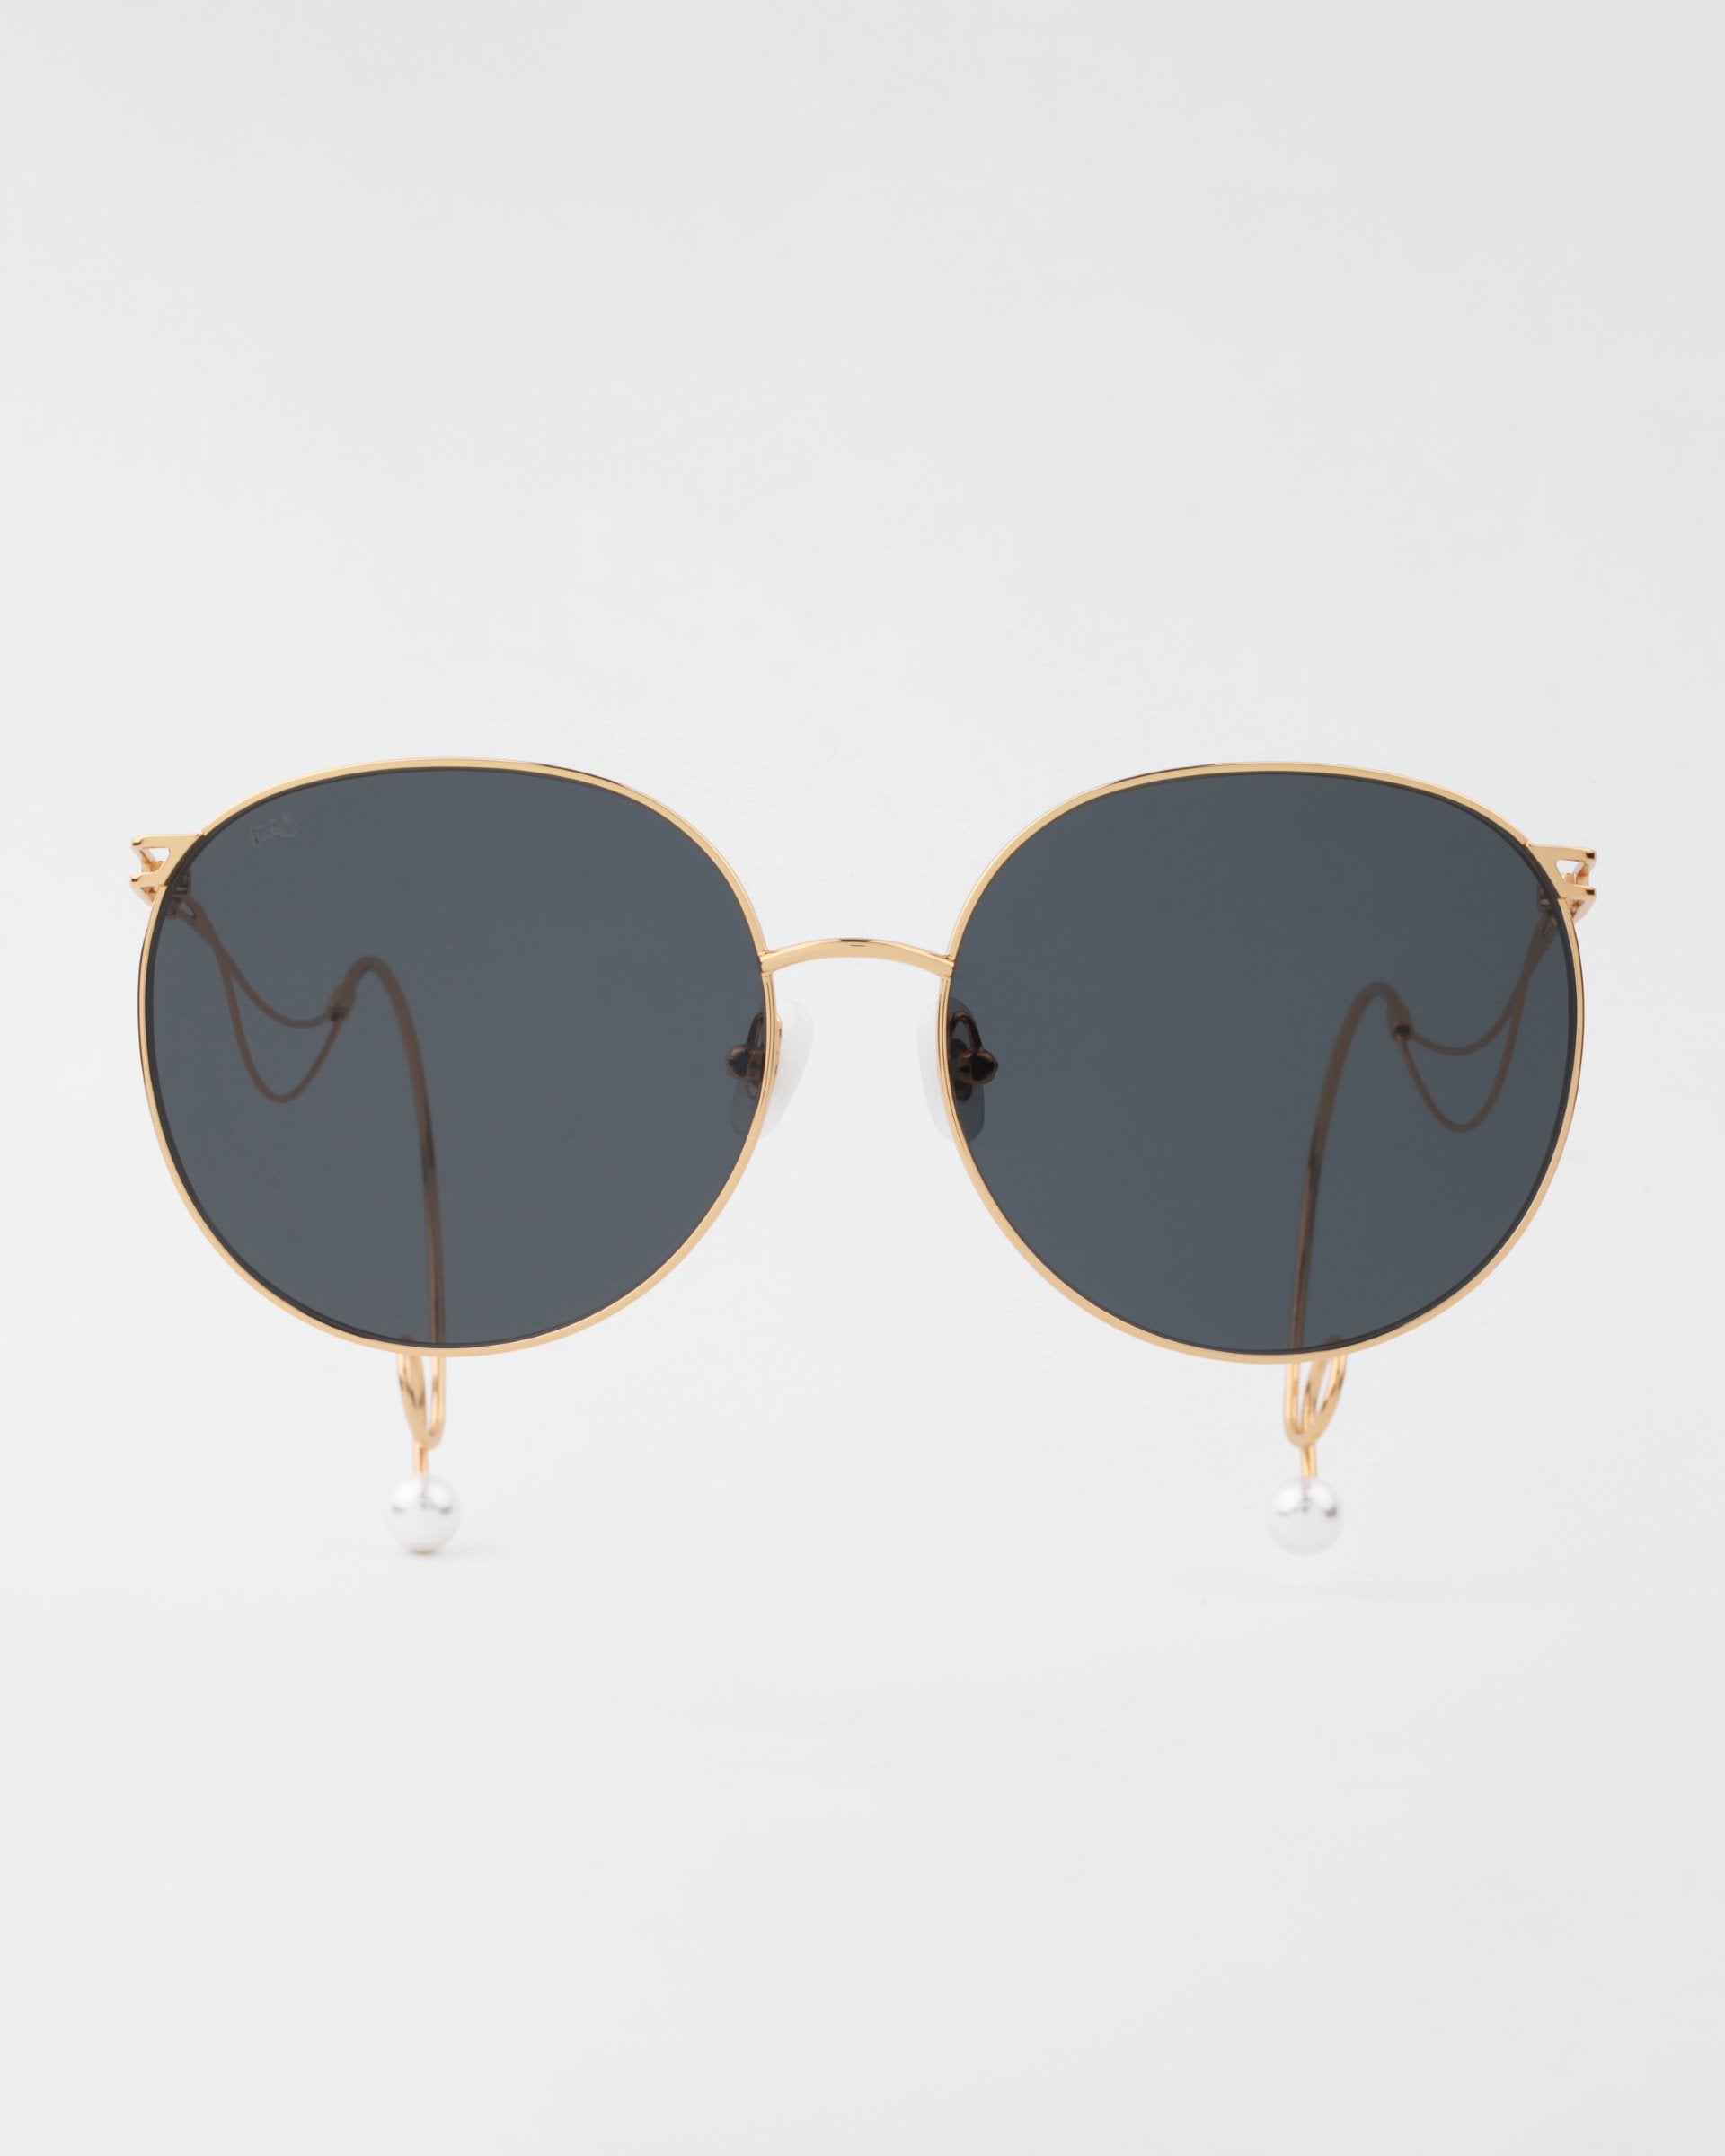 A pair of stylish sunglasses with round, dark, lightweight shatter-resistant lenses and a thin, gold metal frame. The temples feature gold chains with pearl ends attached, hanging down on each side. These Birthday Cake sunglasses by For Art's Sake® are set against a plain white background.